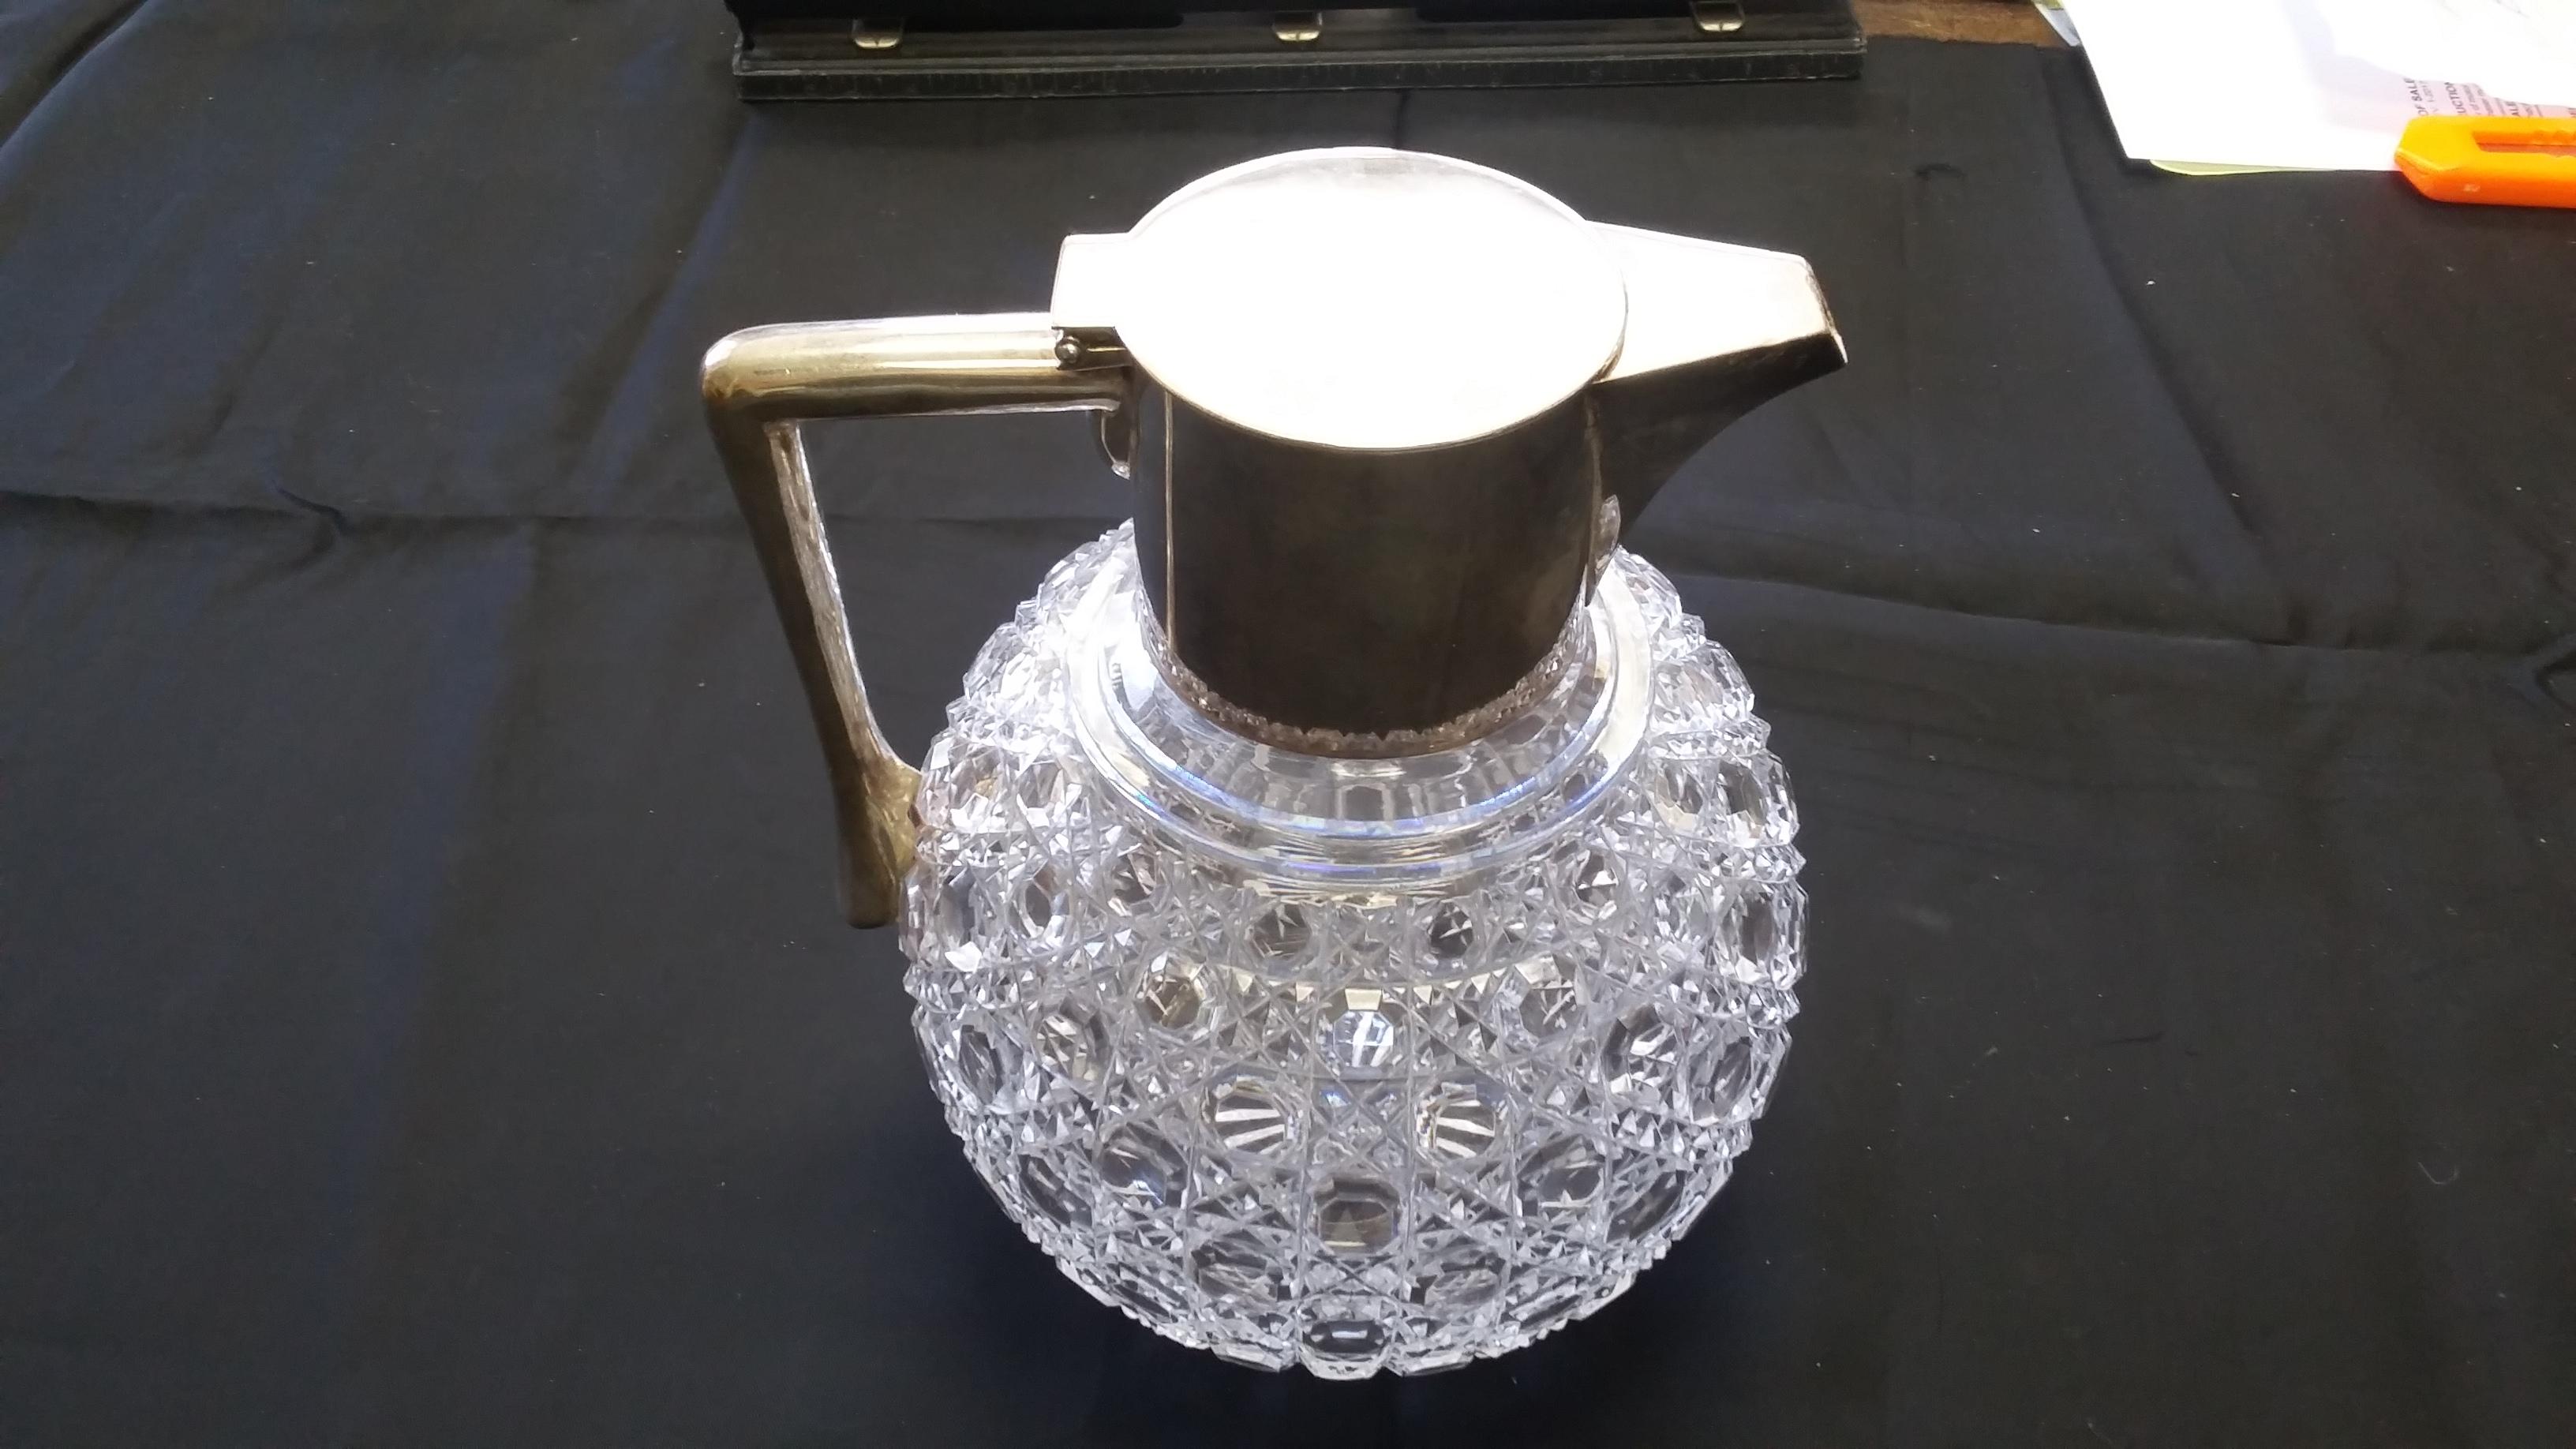 Finely detailed cut glass pitcher with silver plated lid. Markings on the inside of the lid. Starburst cut on the bottom. Hobnail design makes this piece special.